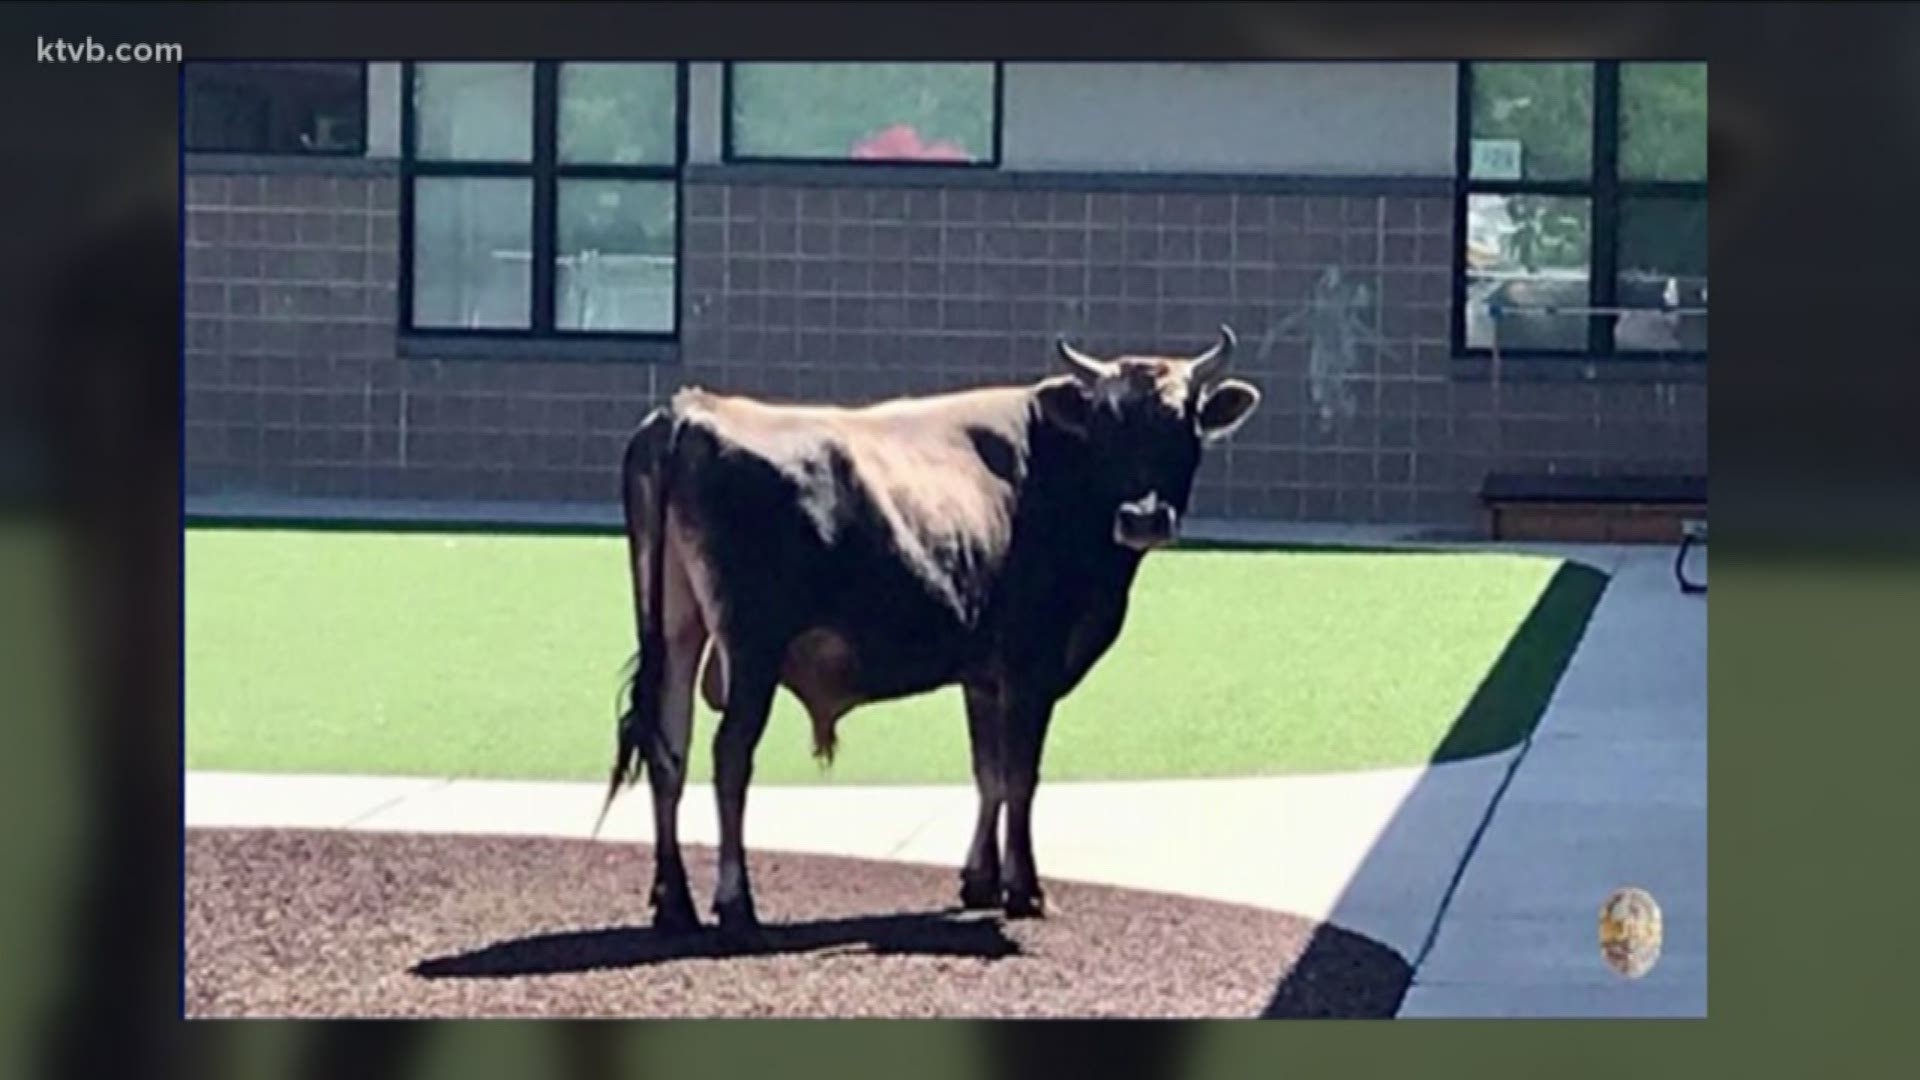 The bull was taken to an animal shelter in Caldwell after police wrangled him in. No word if they have a big enough pen for him.